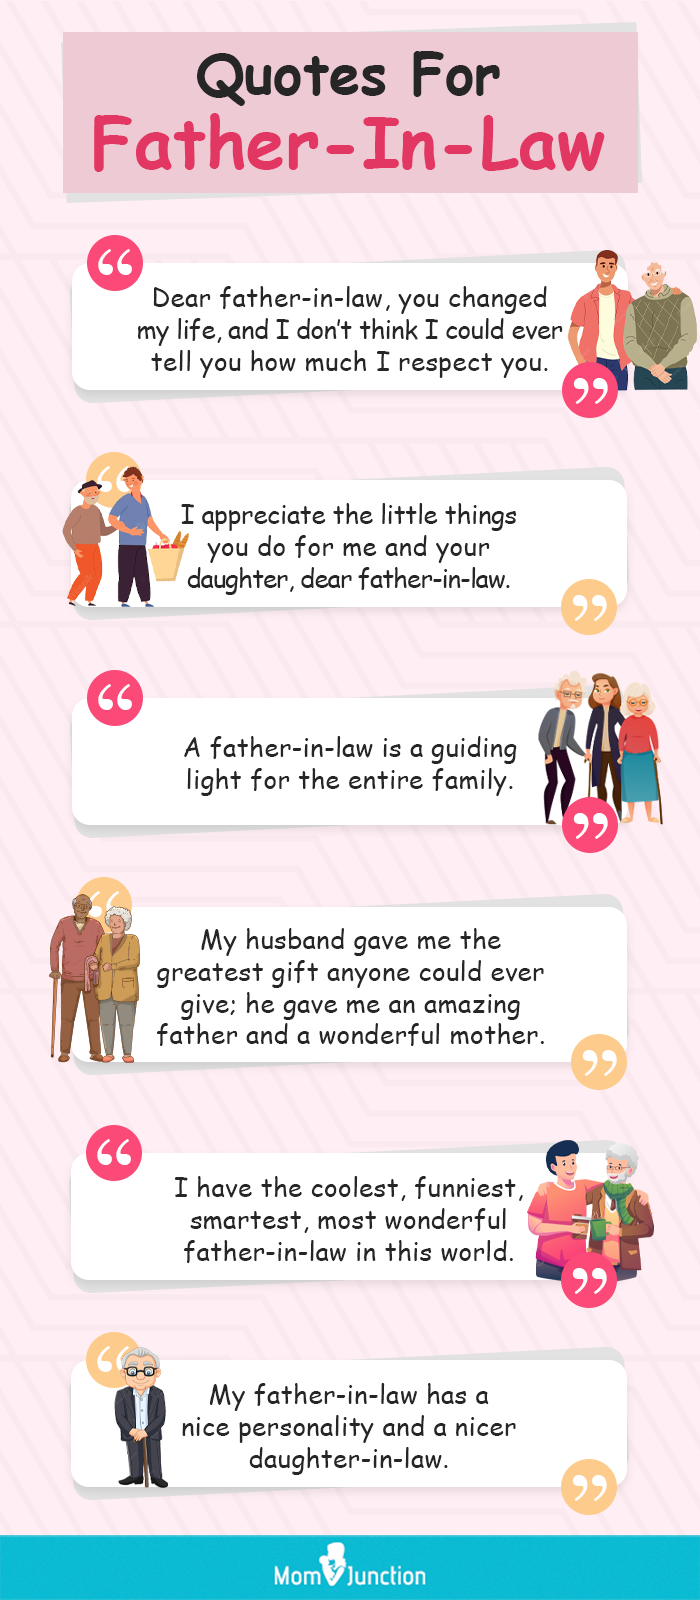 75 Best And Funny Father-In-Law Quotes pic